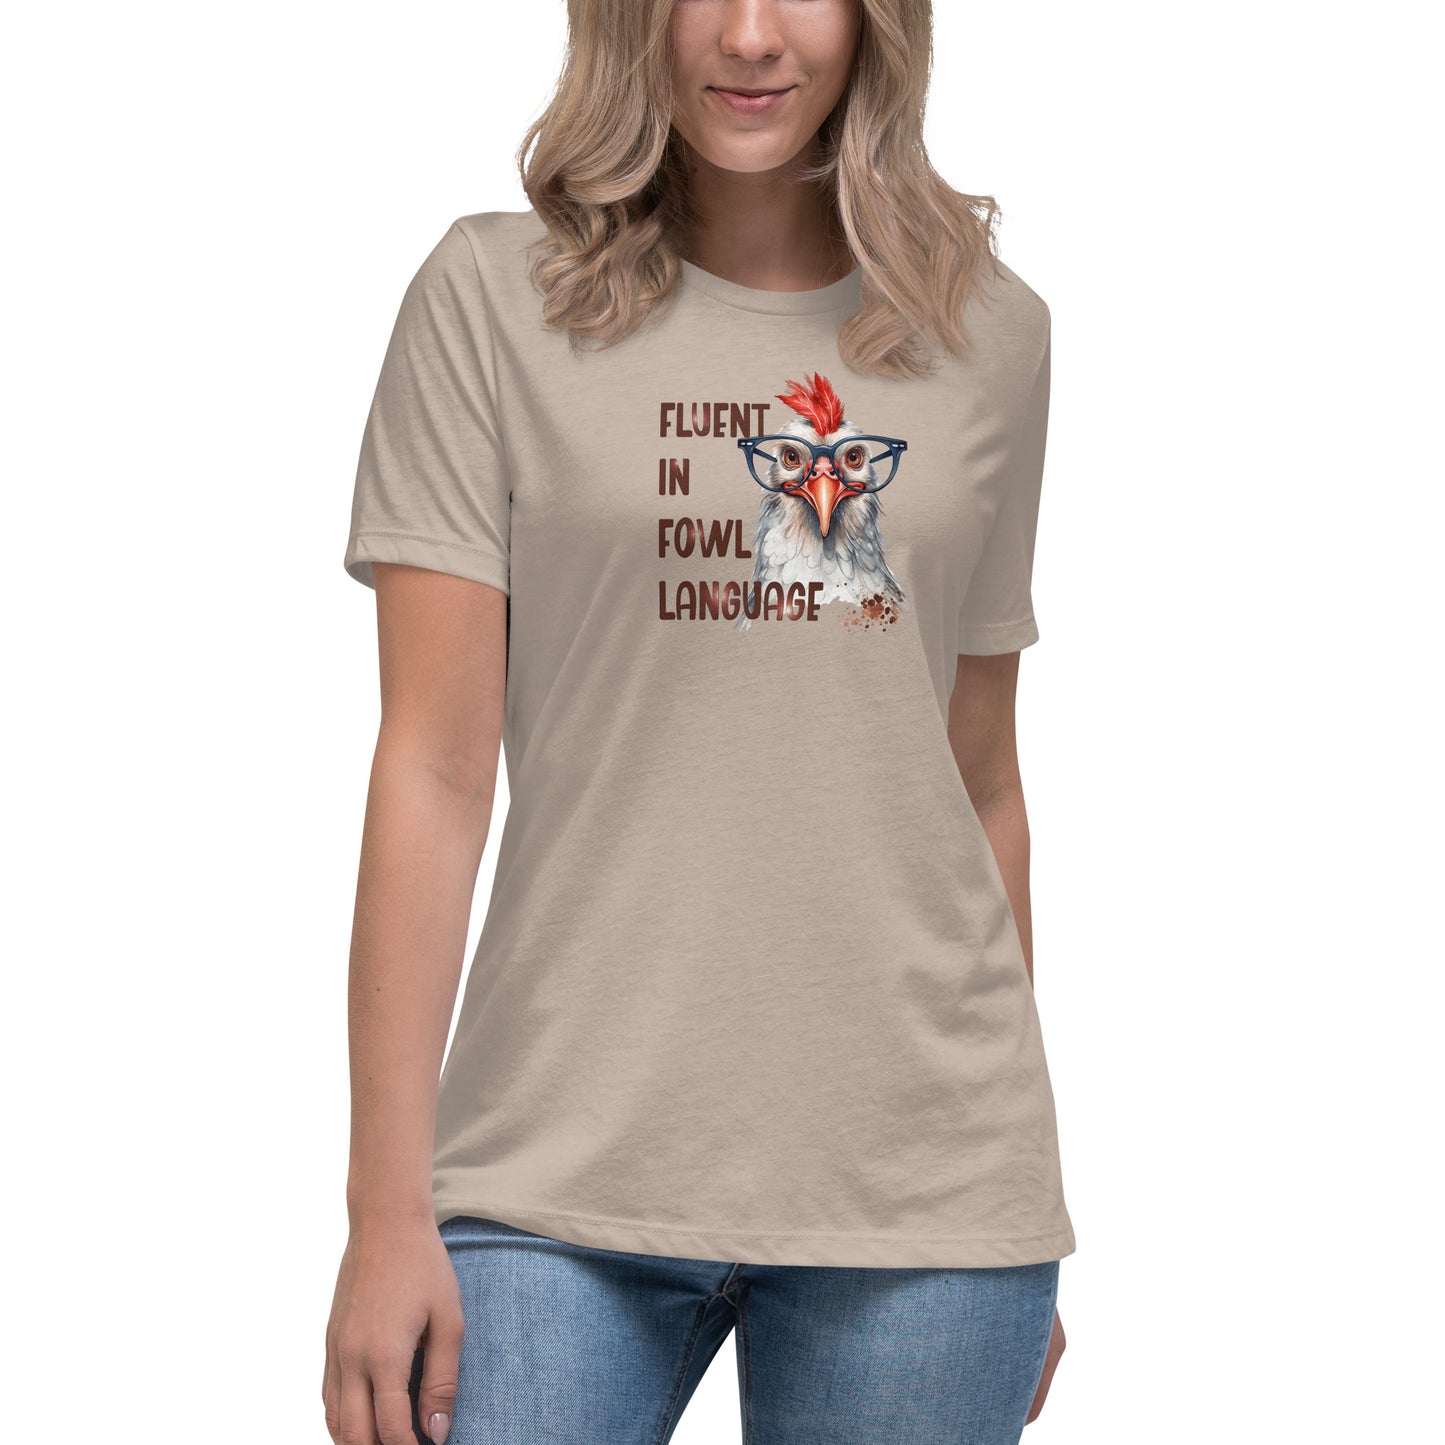 Fluent in Fowl Language Funny Women's Relaxed T-Shirt CedarHill Country Market